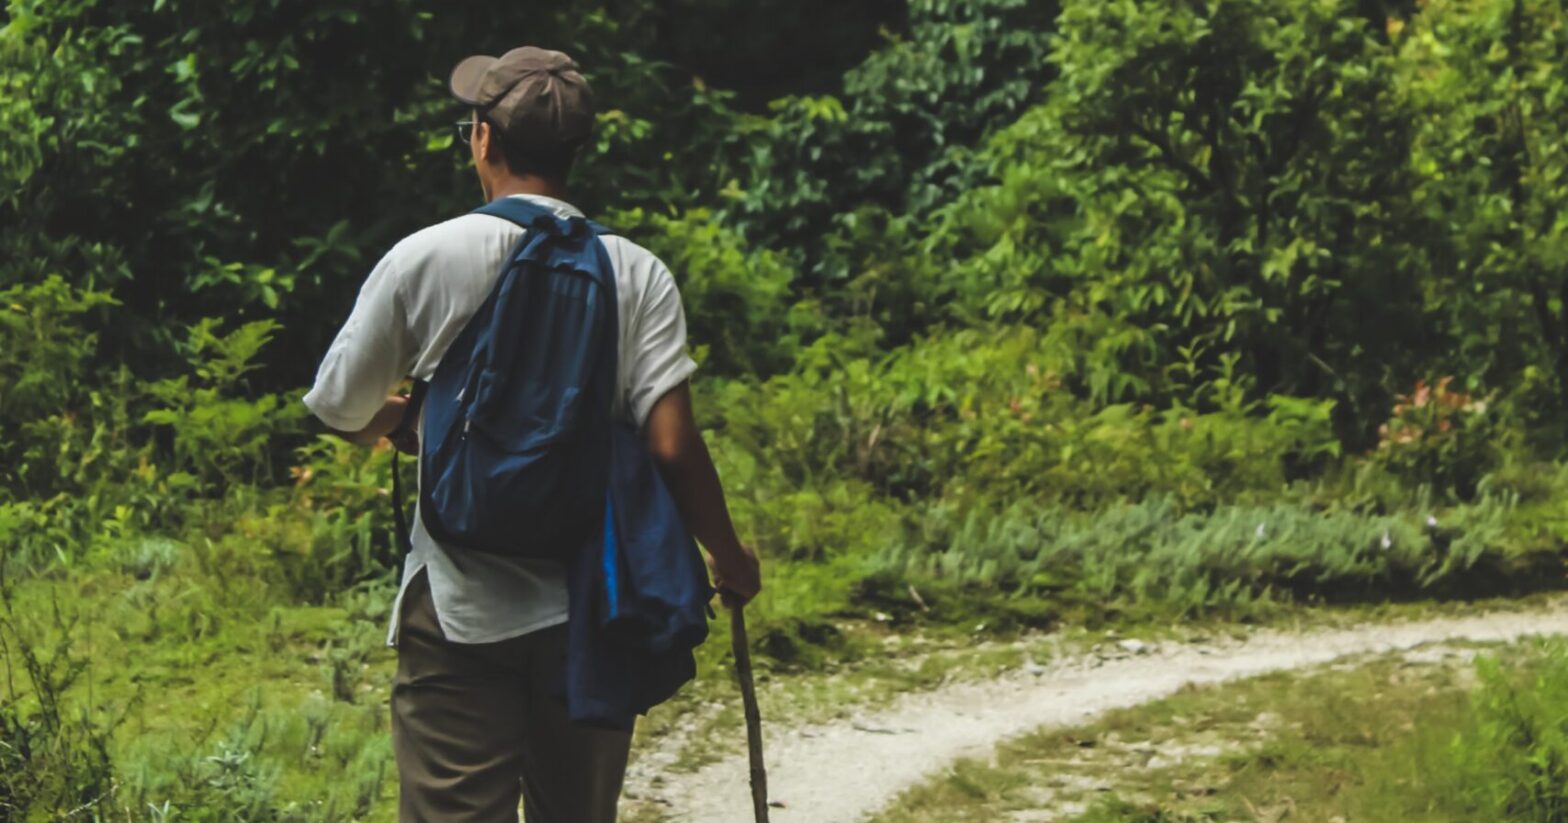 Man walking on trail and carrying a backpack